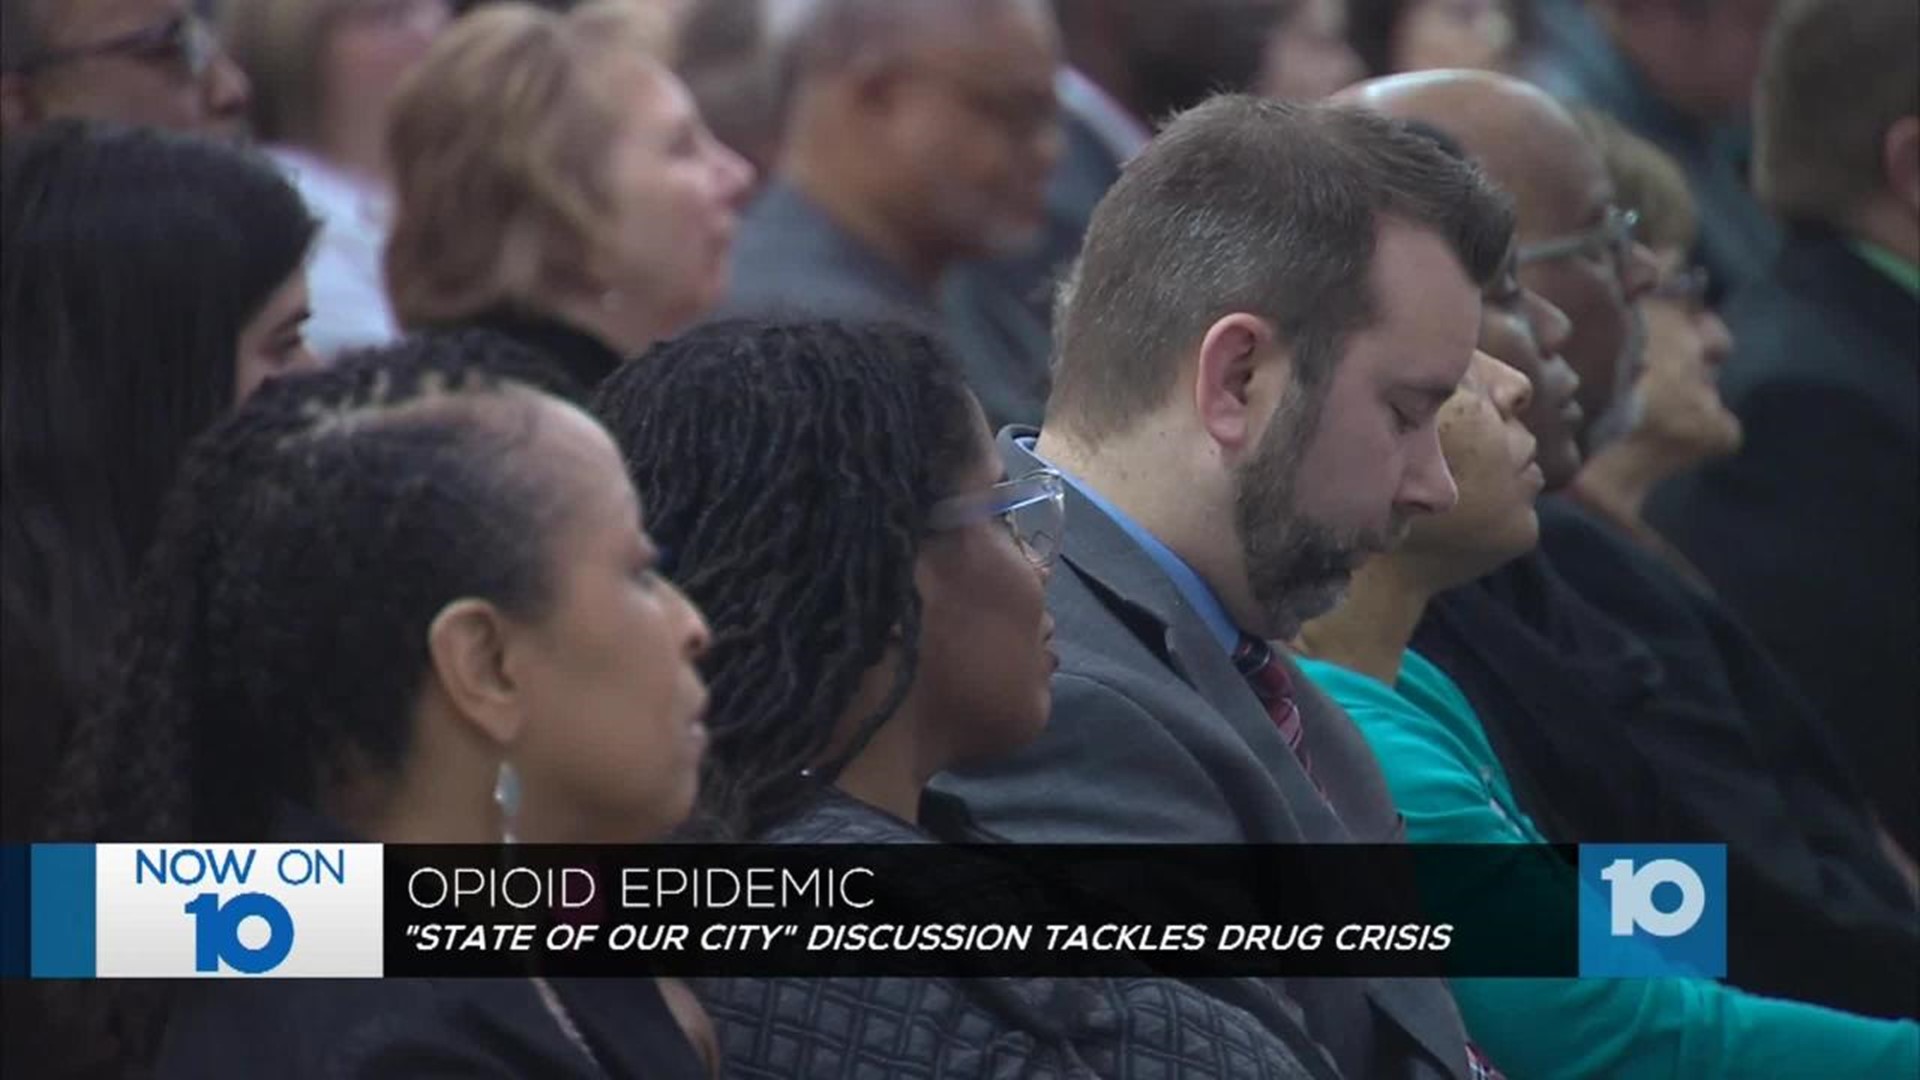 Mayor Ginther discusses drug epidemic in latest city forum